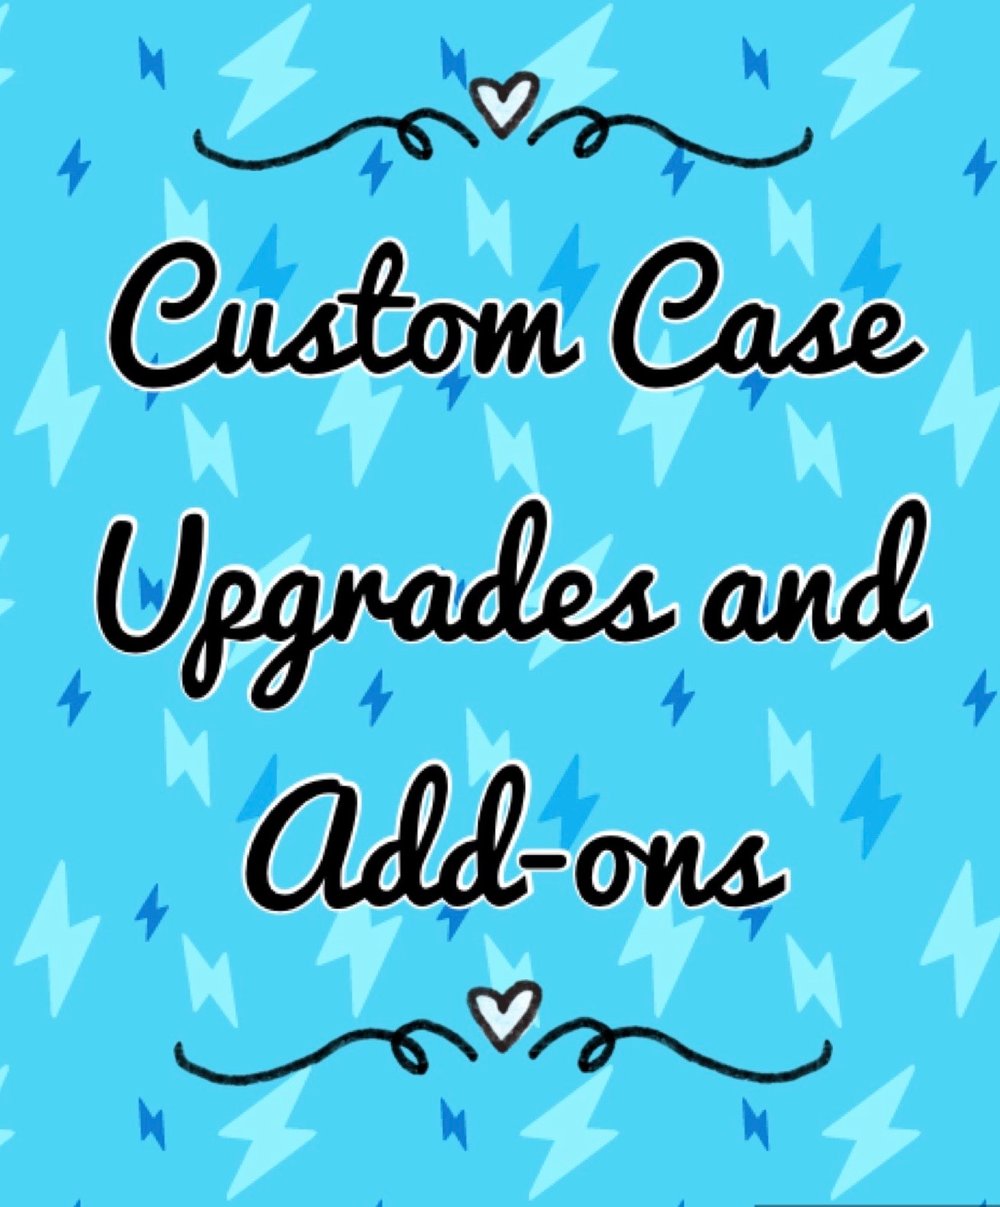 Image of Case Upgrades and Add-ons